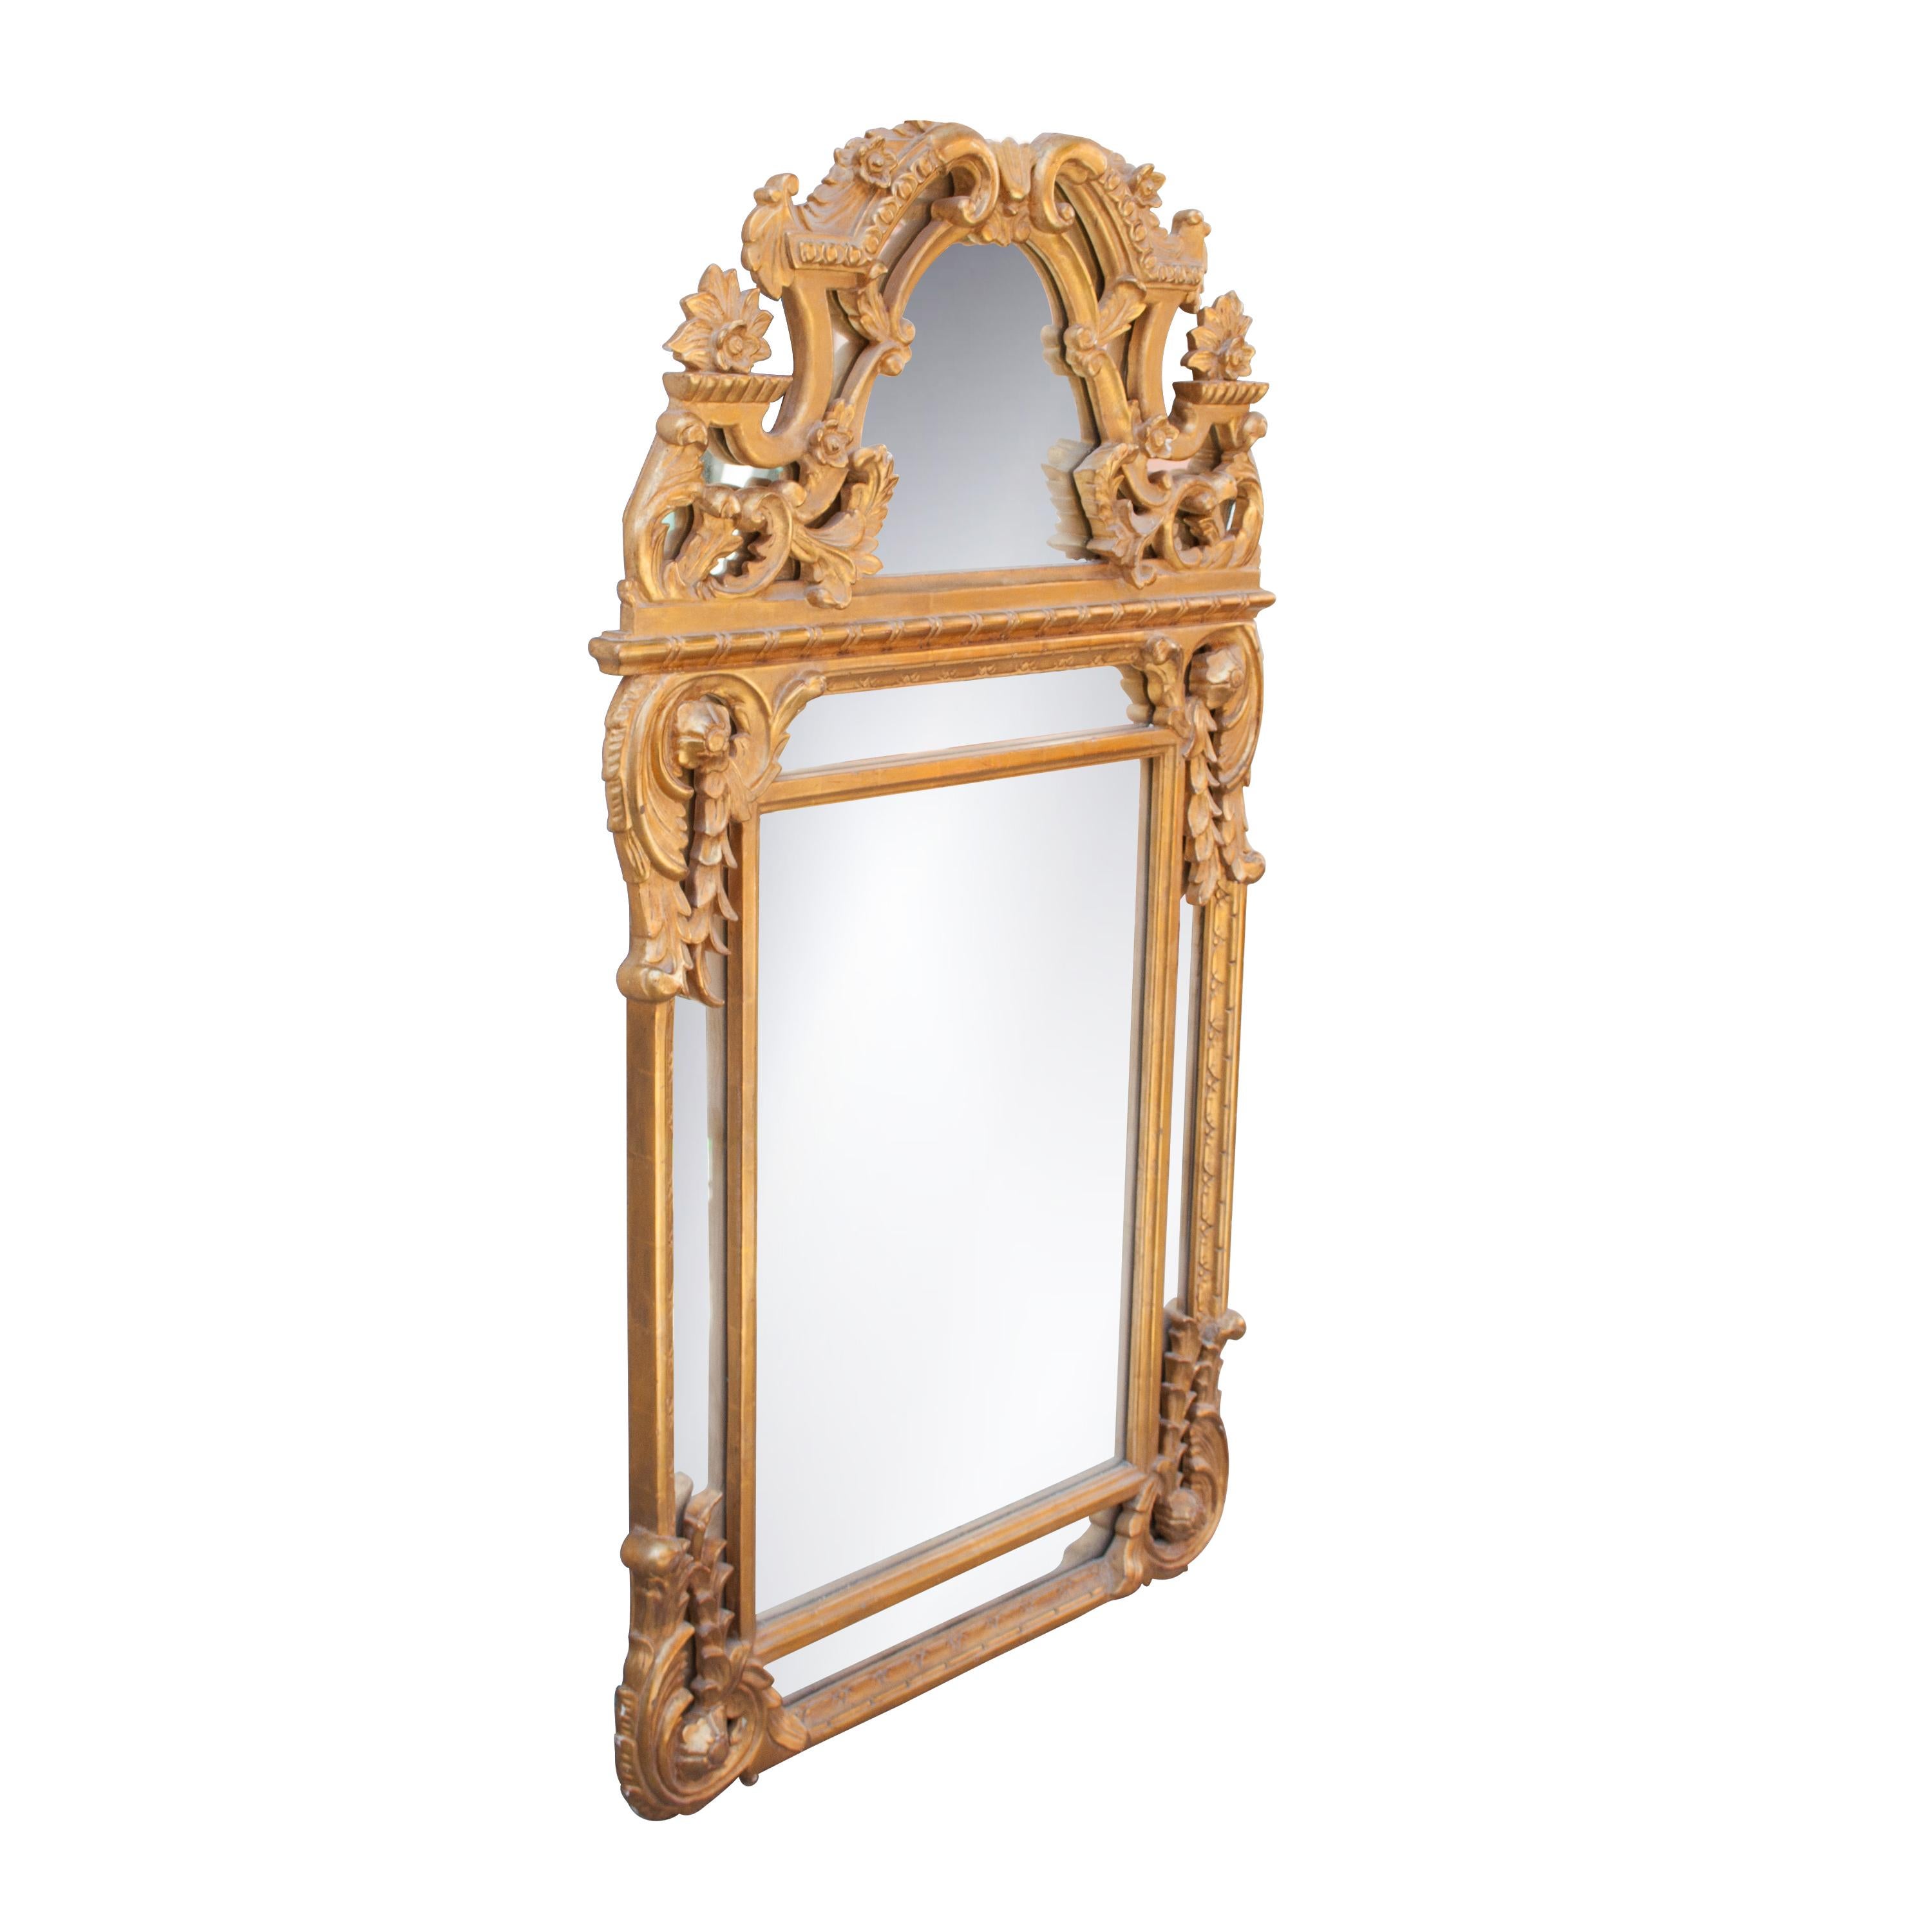 Neoclassical rectangular handcrafted mirror. Hand carved wooden structure with gold foil finished. Spain, 1970.